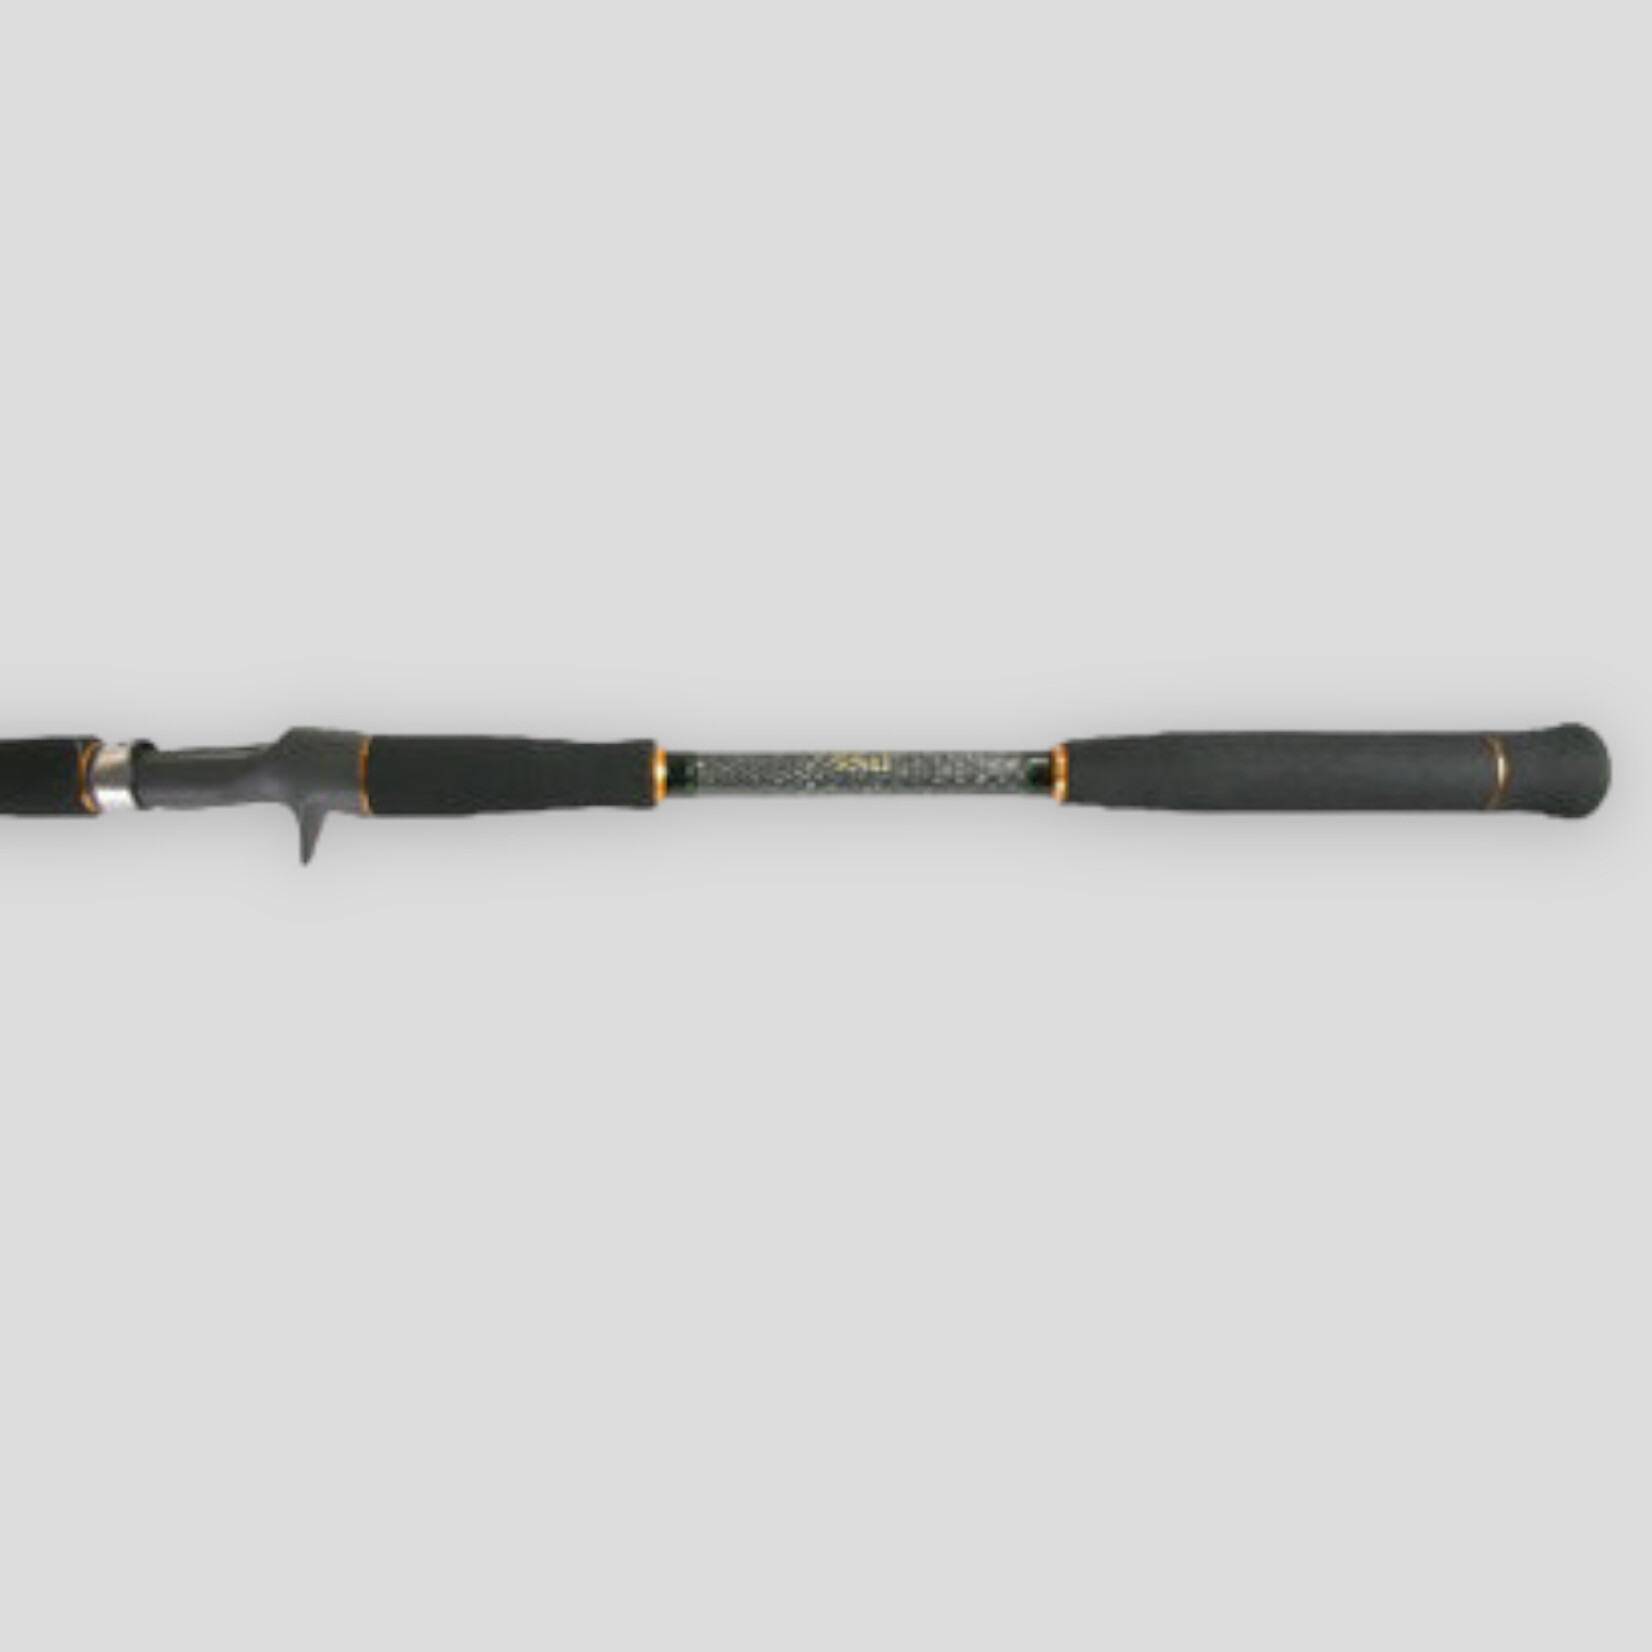 casting rod jigging - Buy casting rod jigging at Best Price in Malaysia